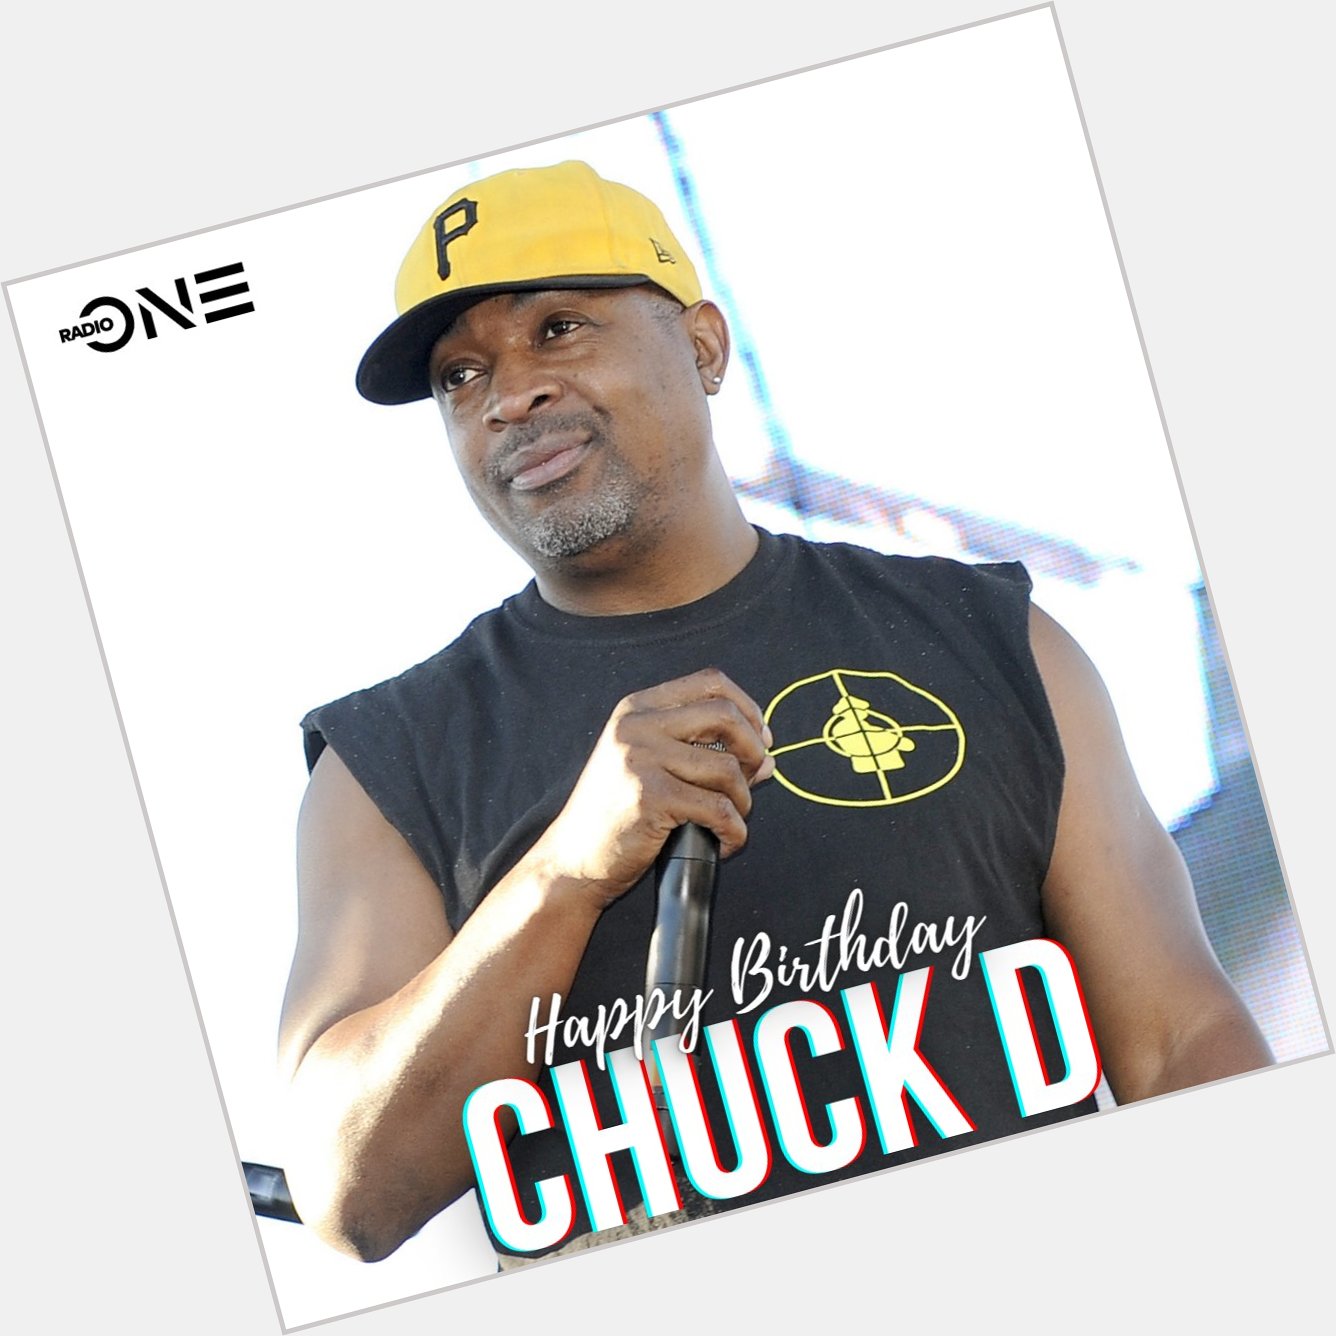 Chuck D of Public Enemy fame celebrates 61 years of life today! Happy Birthday 